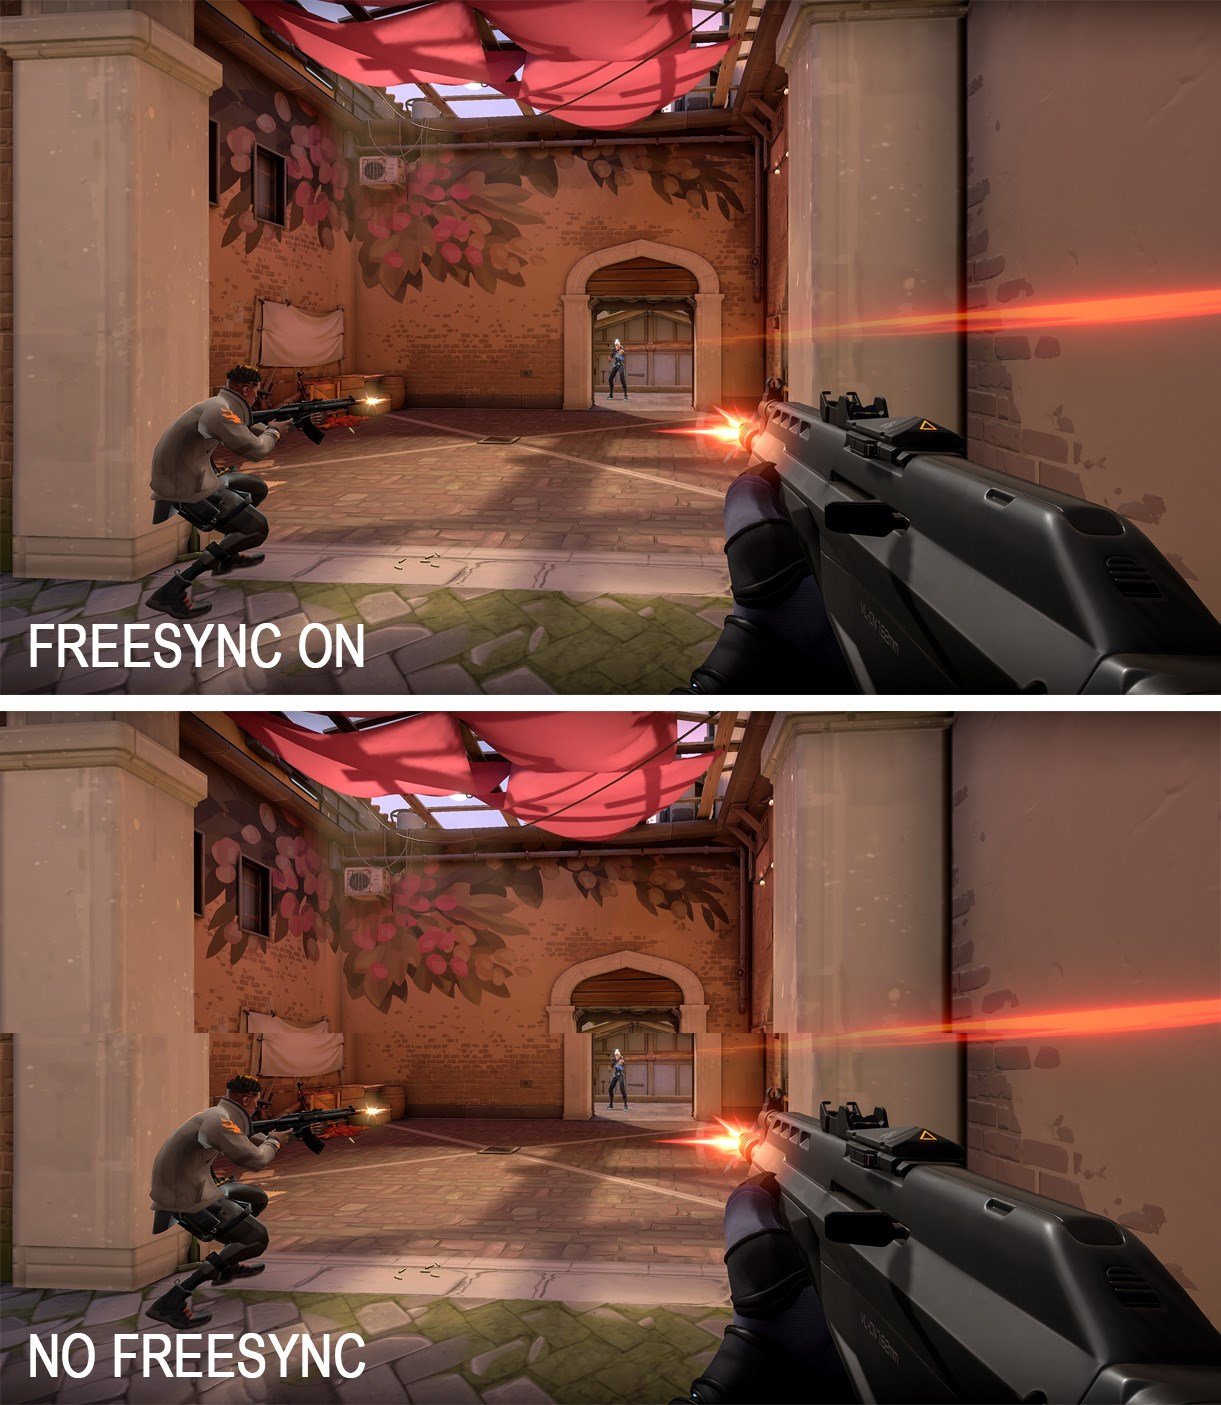 A comparison between the image quality with FreeSync on and off using the game Valorant.